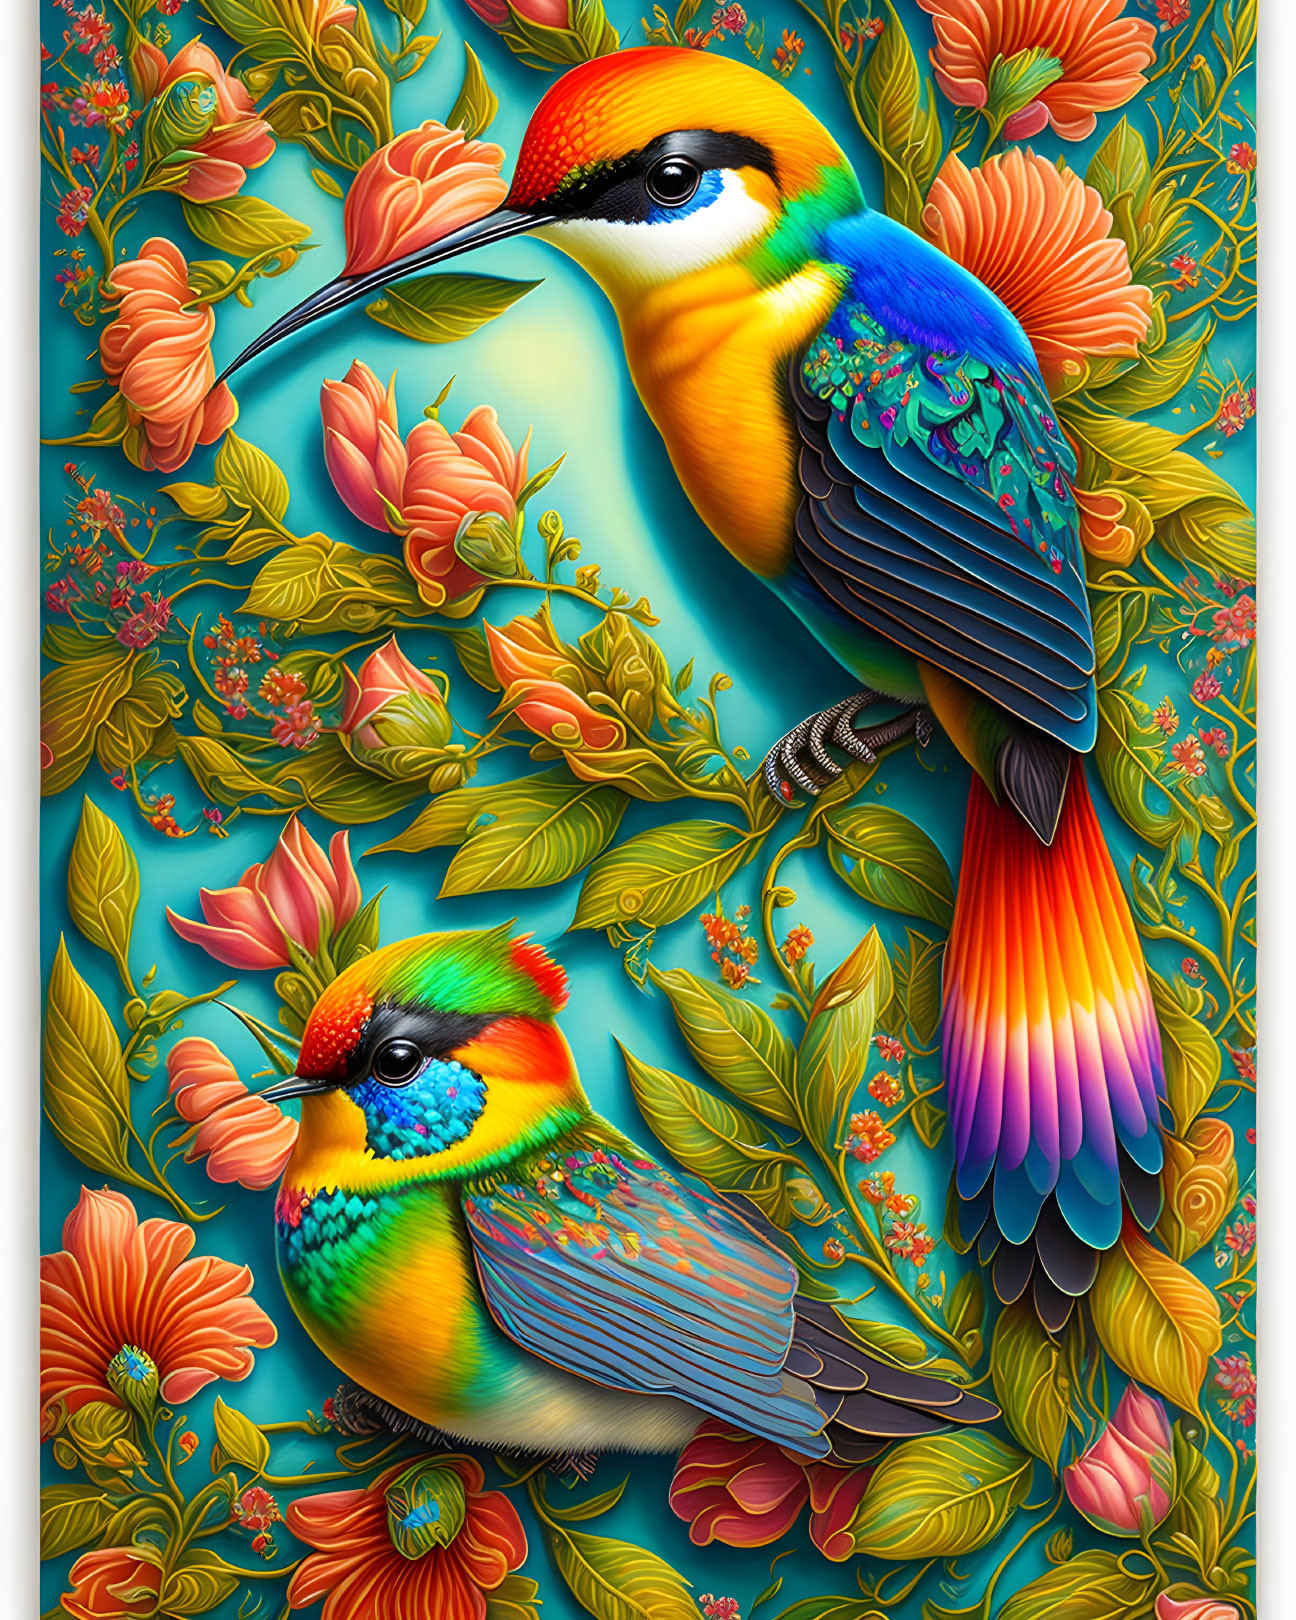 Colorful Birds with Detailed Feathers Among Flowers on Teal Background